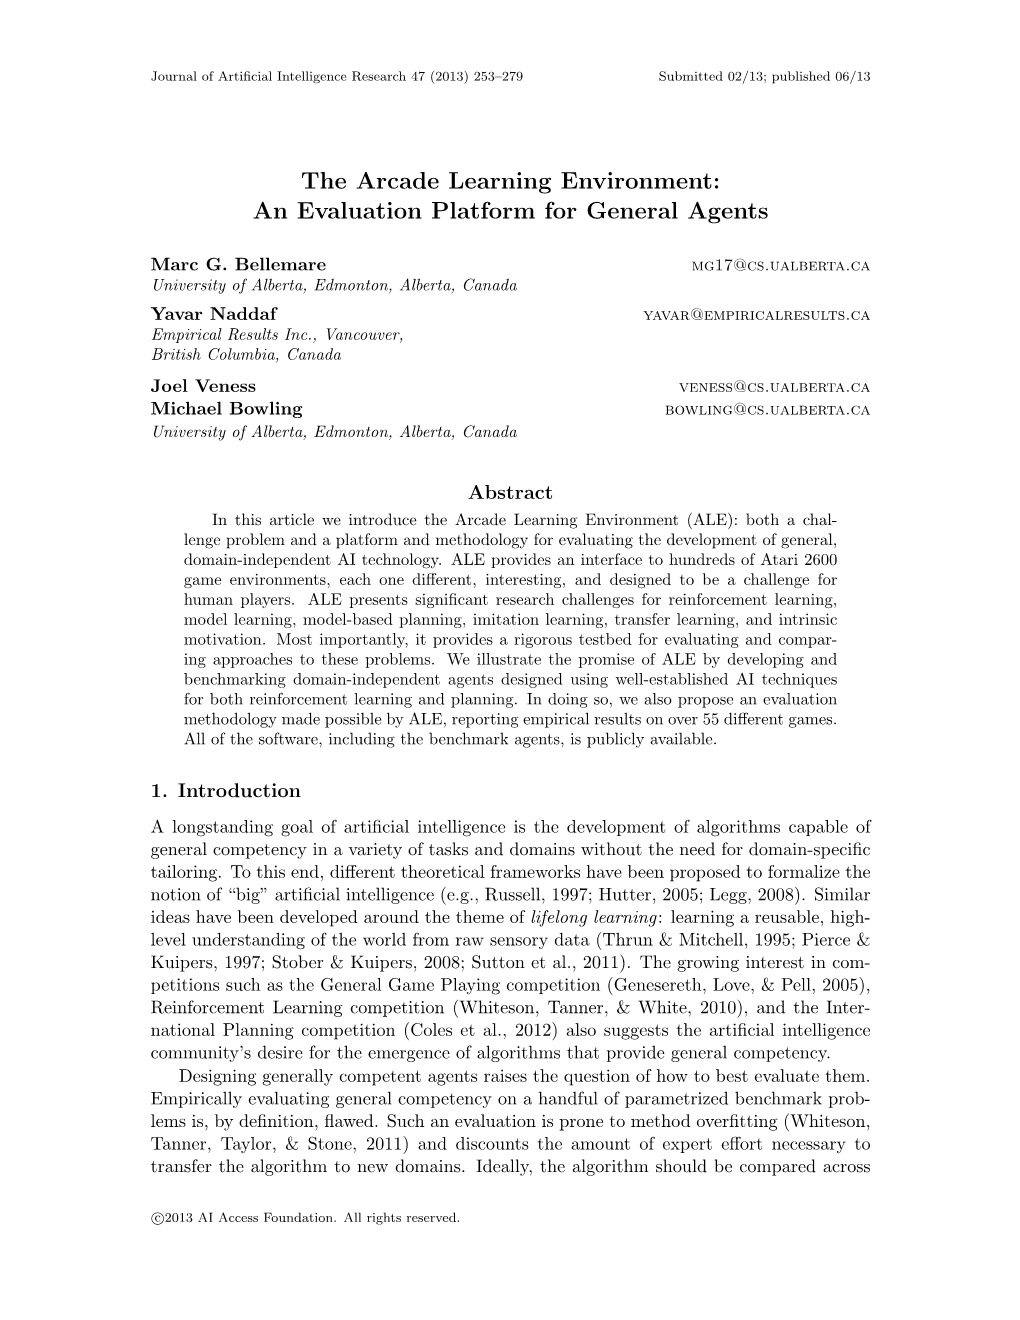 The Arcade Learning Environment: an Evaluation Platform for General Agents